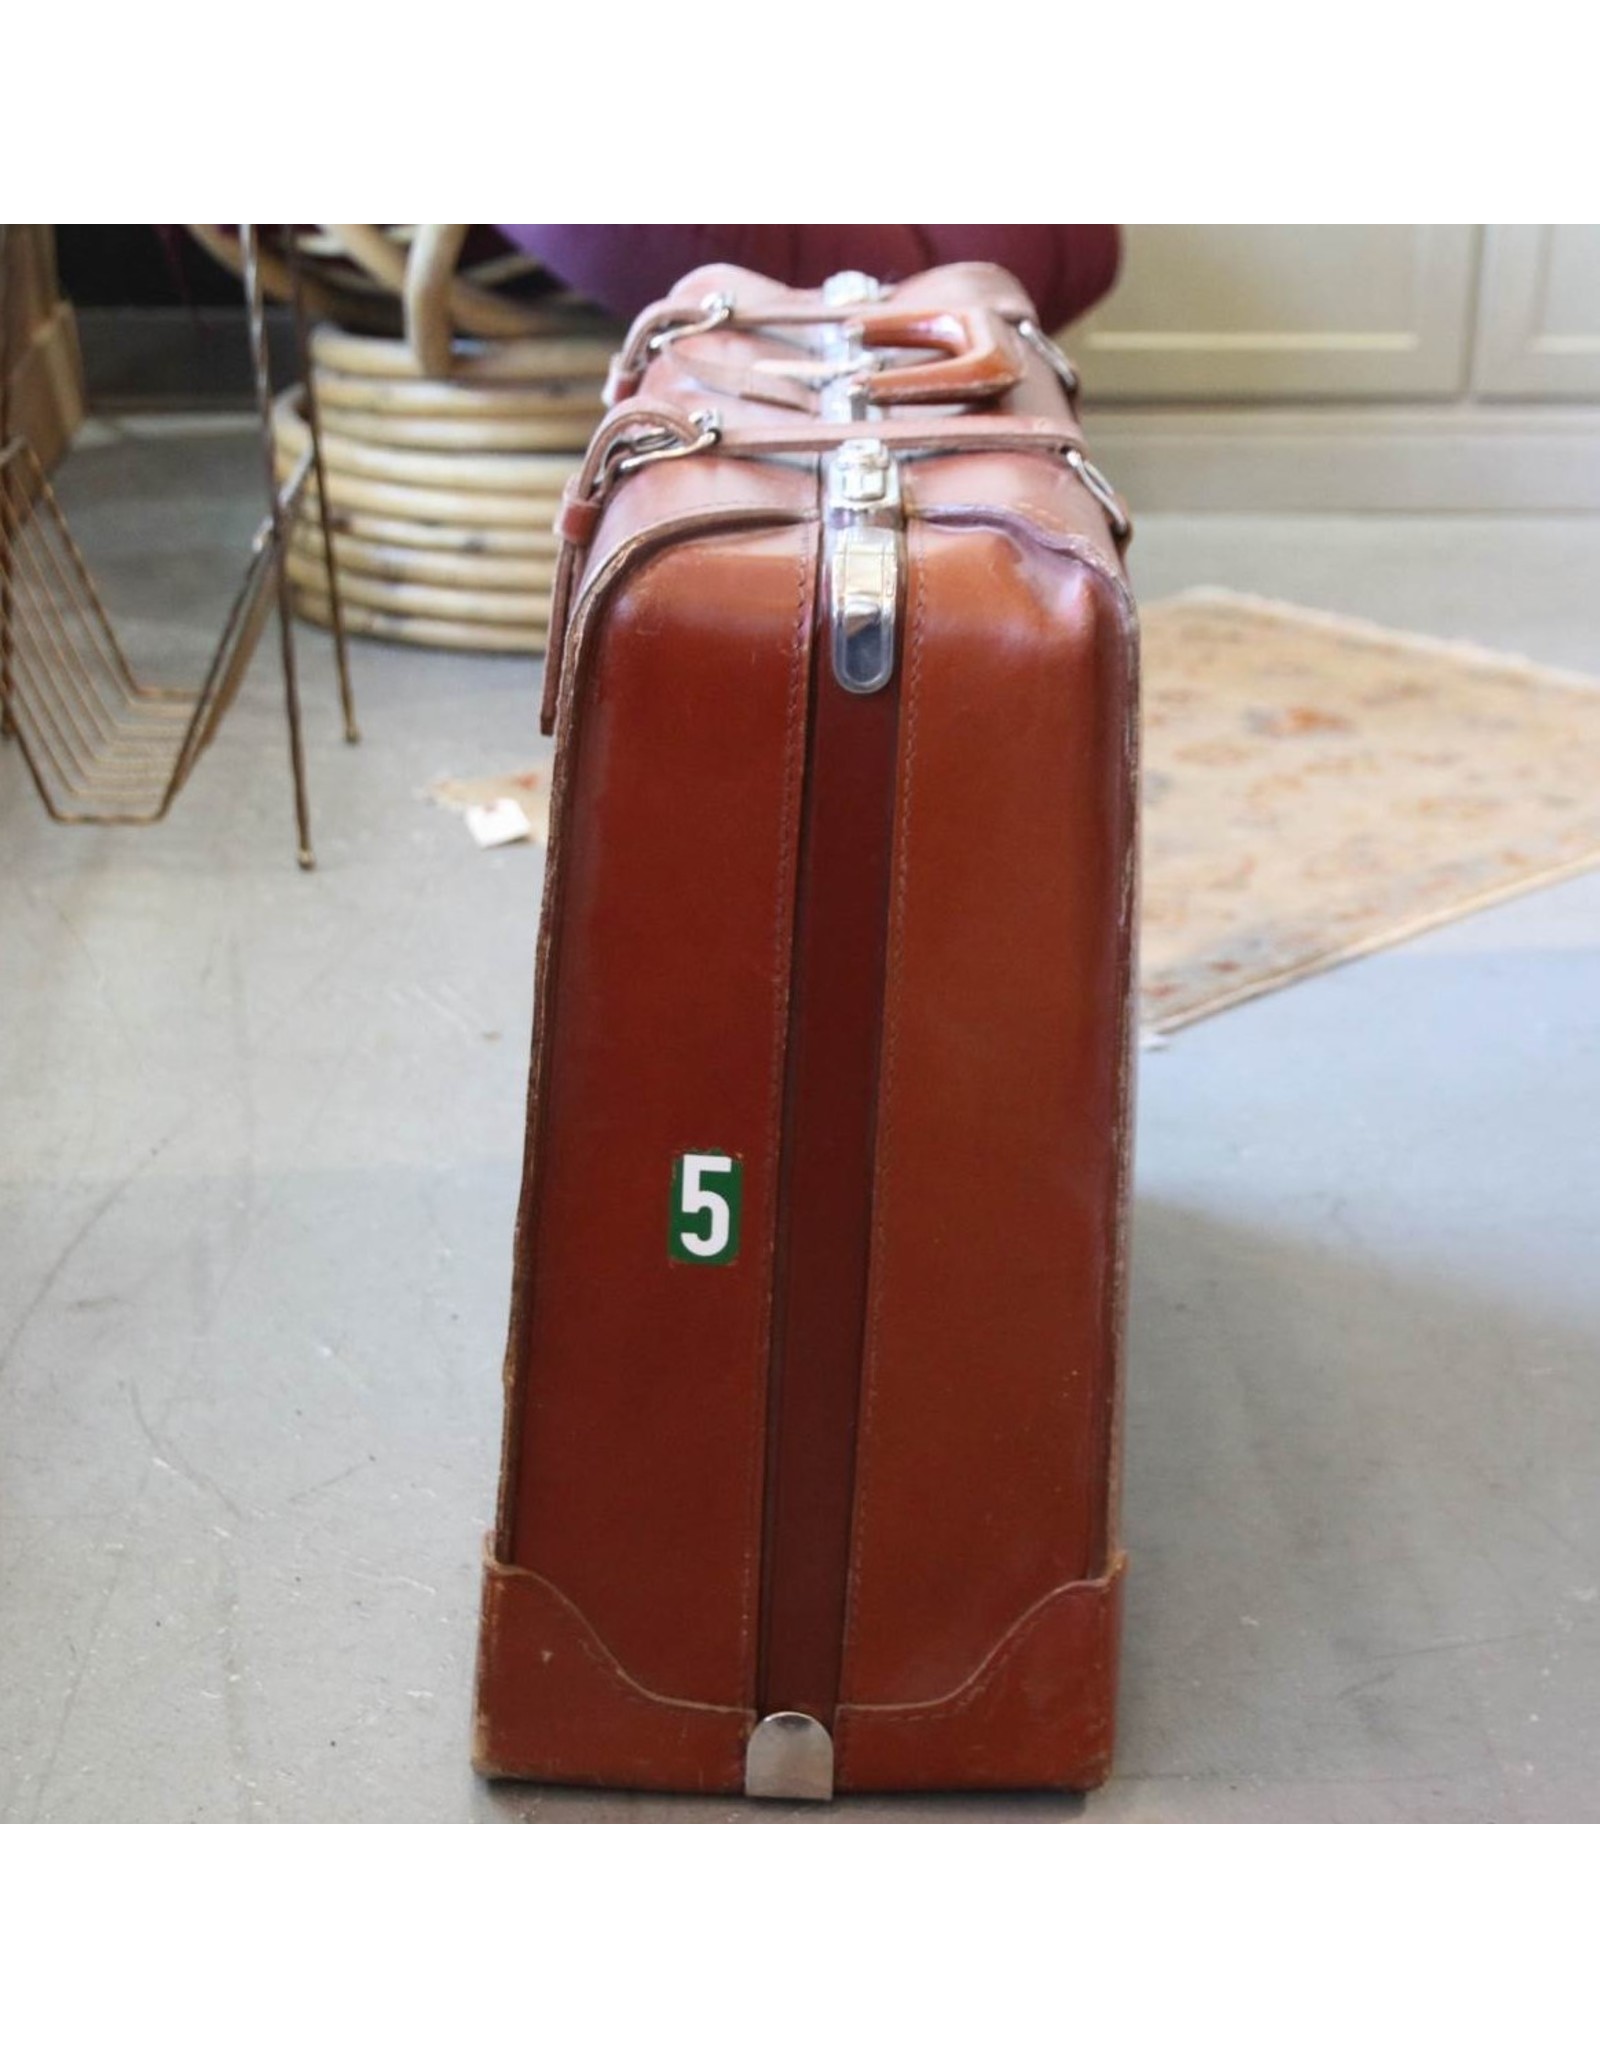 Suitcase - brown leather straps buckles